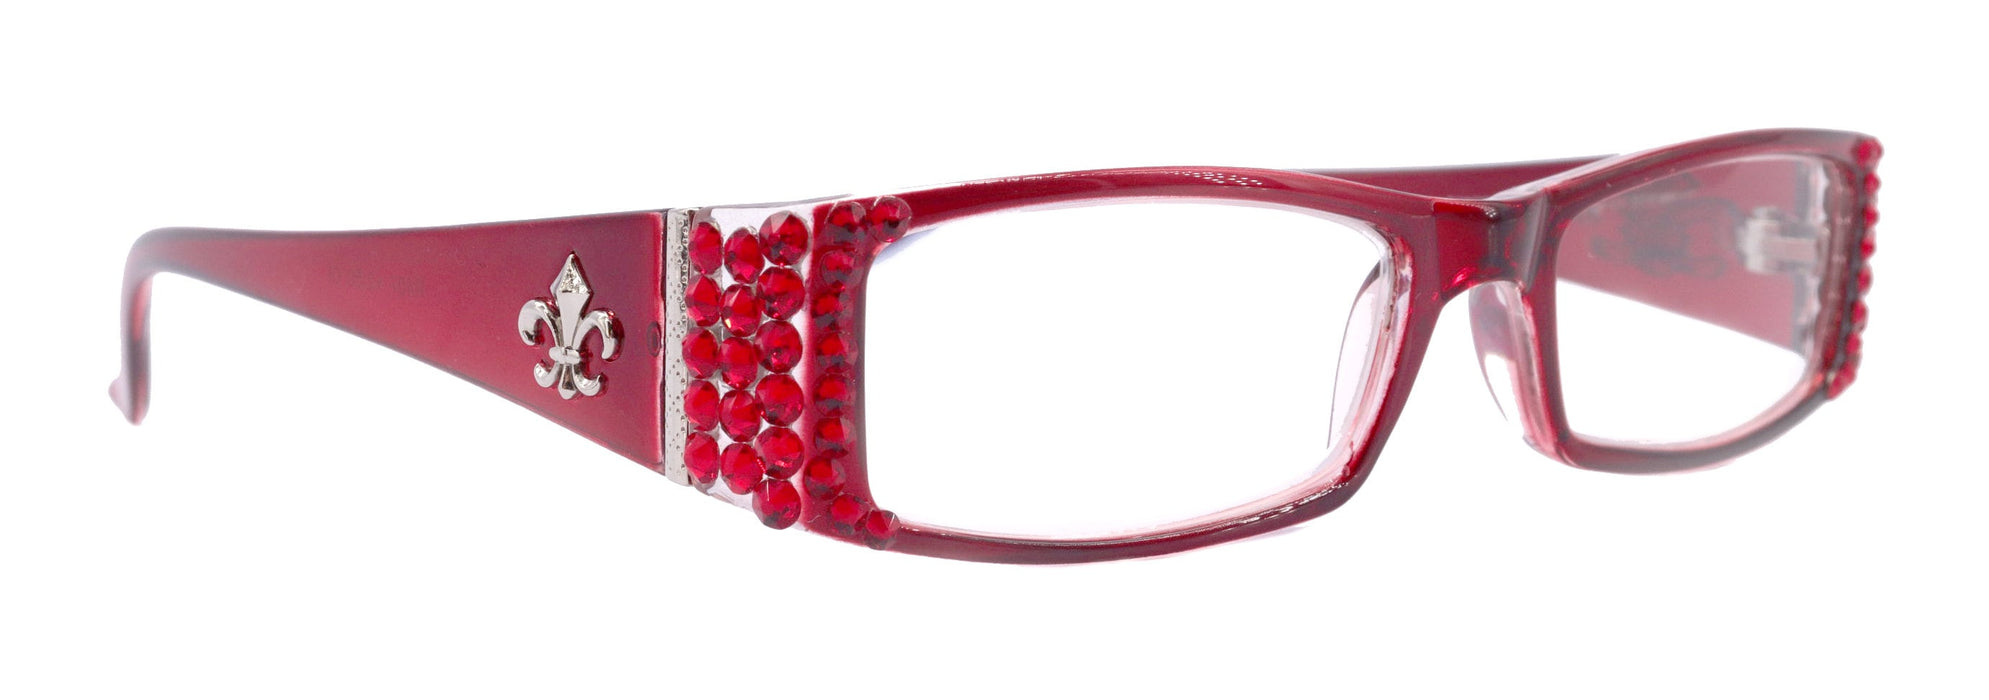 The French, (Bling) (Fleur De Lis) Women Reading Glasses W (Light Siam) European Crystals +1 .. +3 (Red) Frame, NY Fifth Avenue